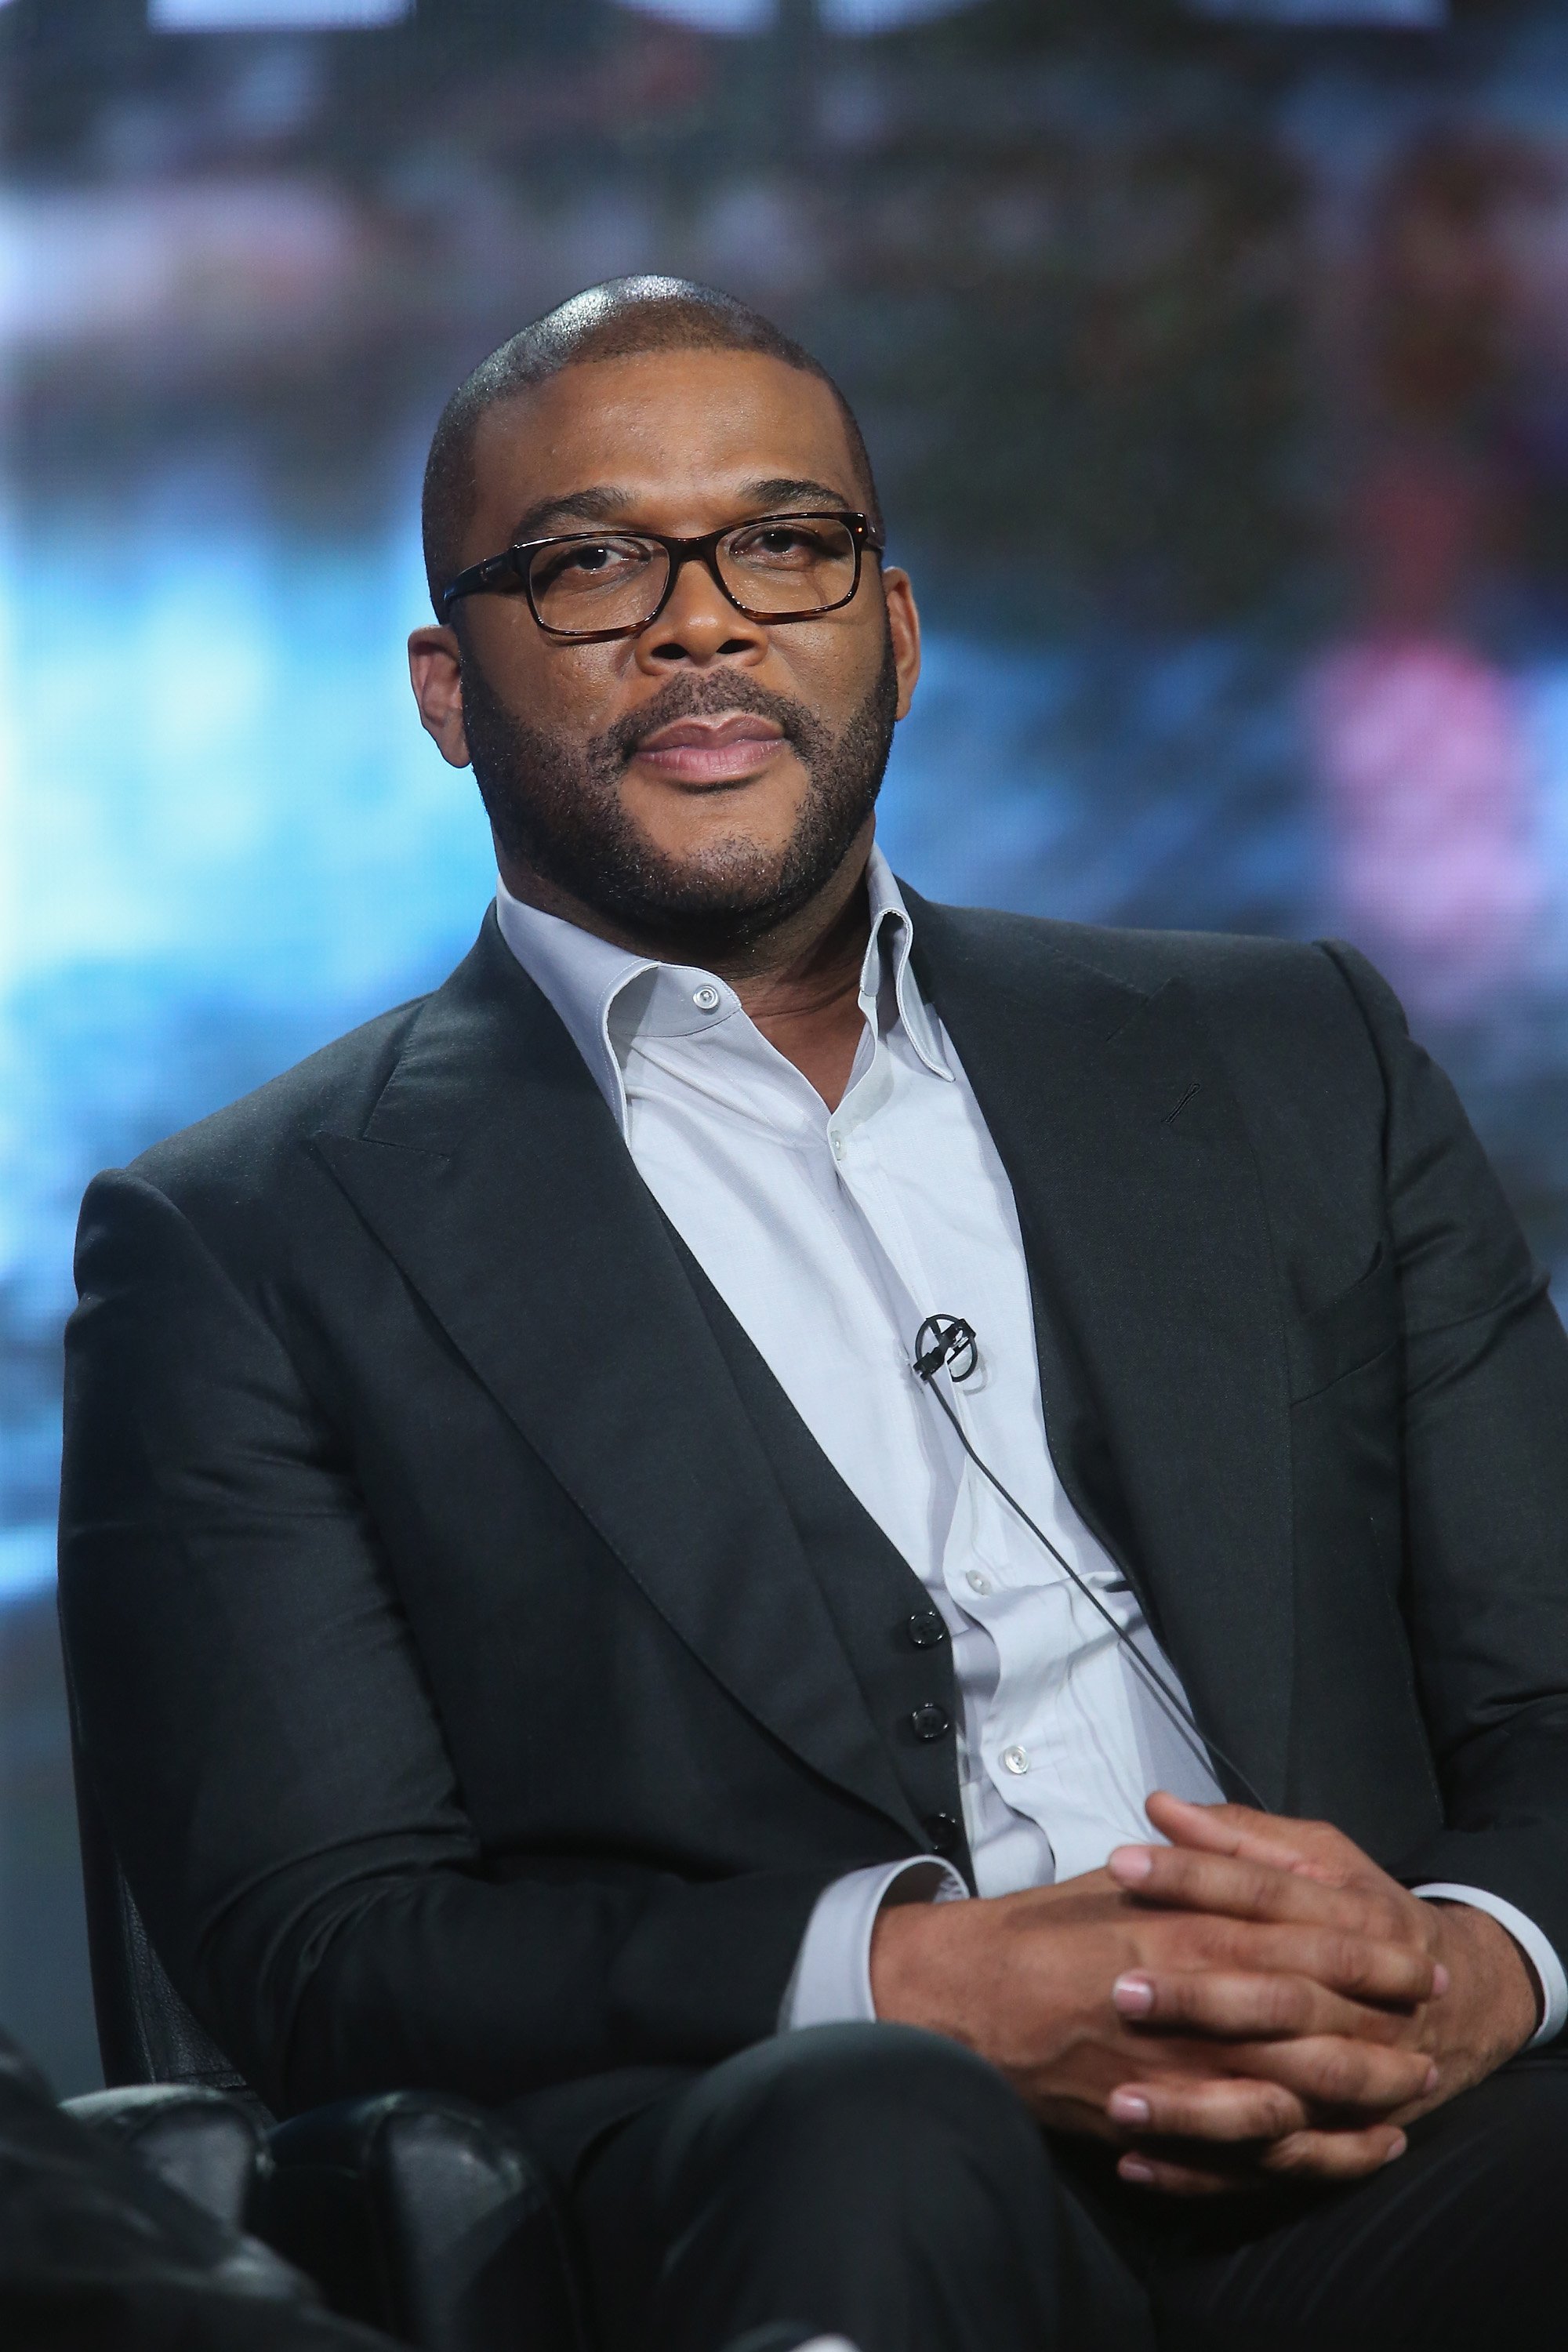 Tyler Perry as a speaker at a panel discussion for the 2015 Winter TCA Tour in California. | Photo: Getty Images